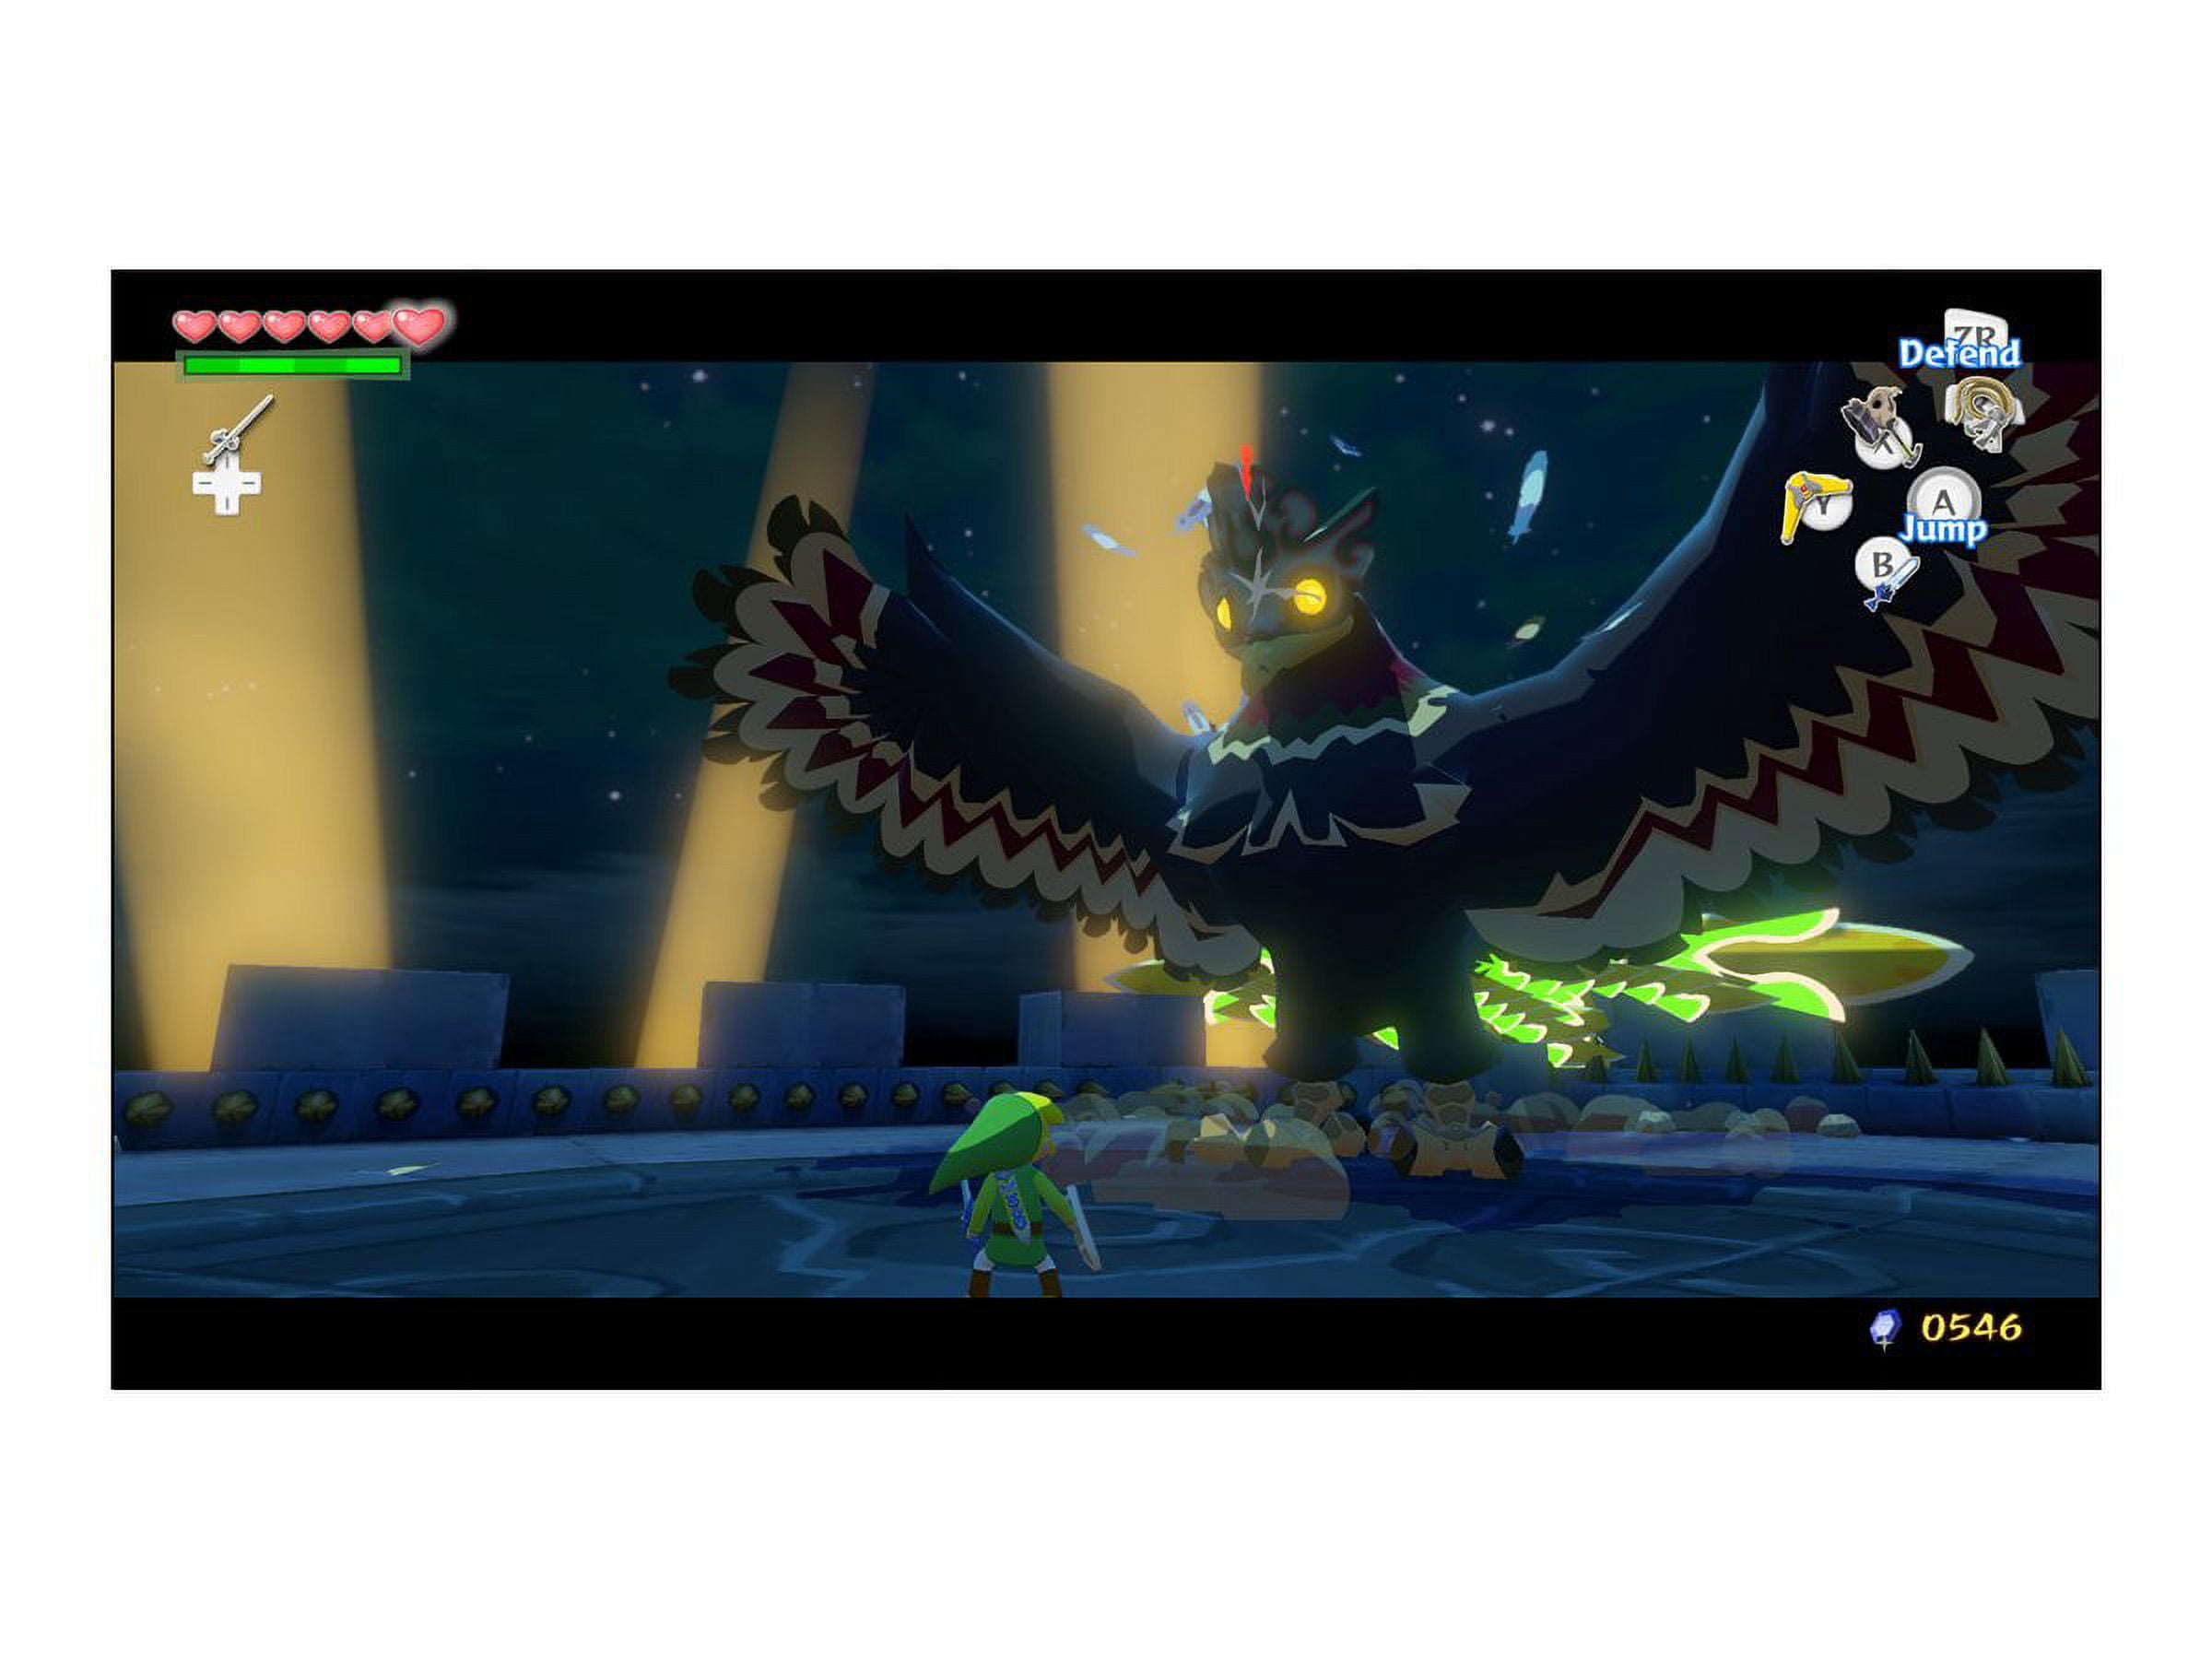 WW] [WWHD] [OC] Conceptual Wind Waker HD Port for the Switch with a new  game mode to play in. : r/zelda